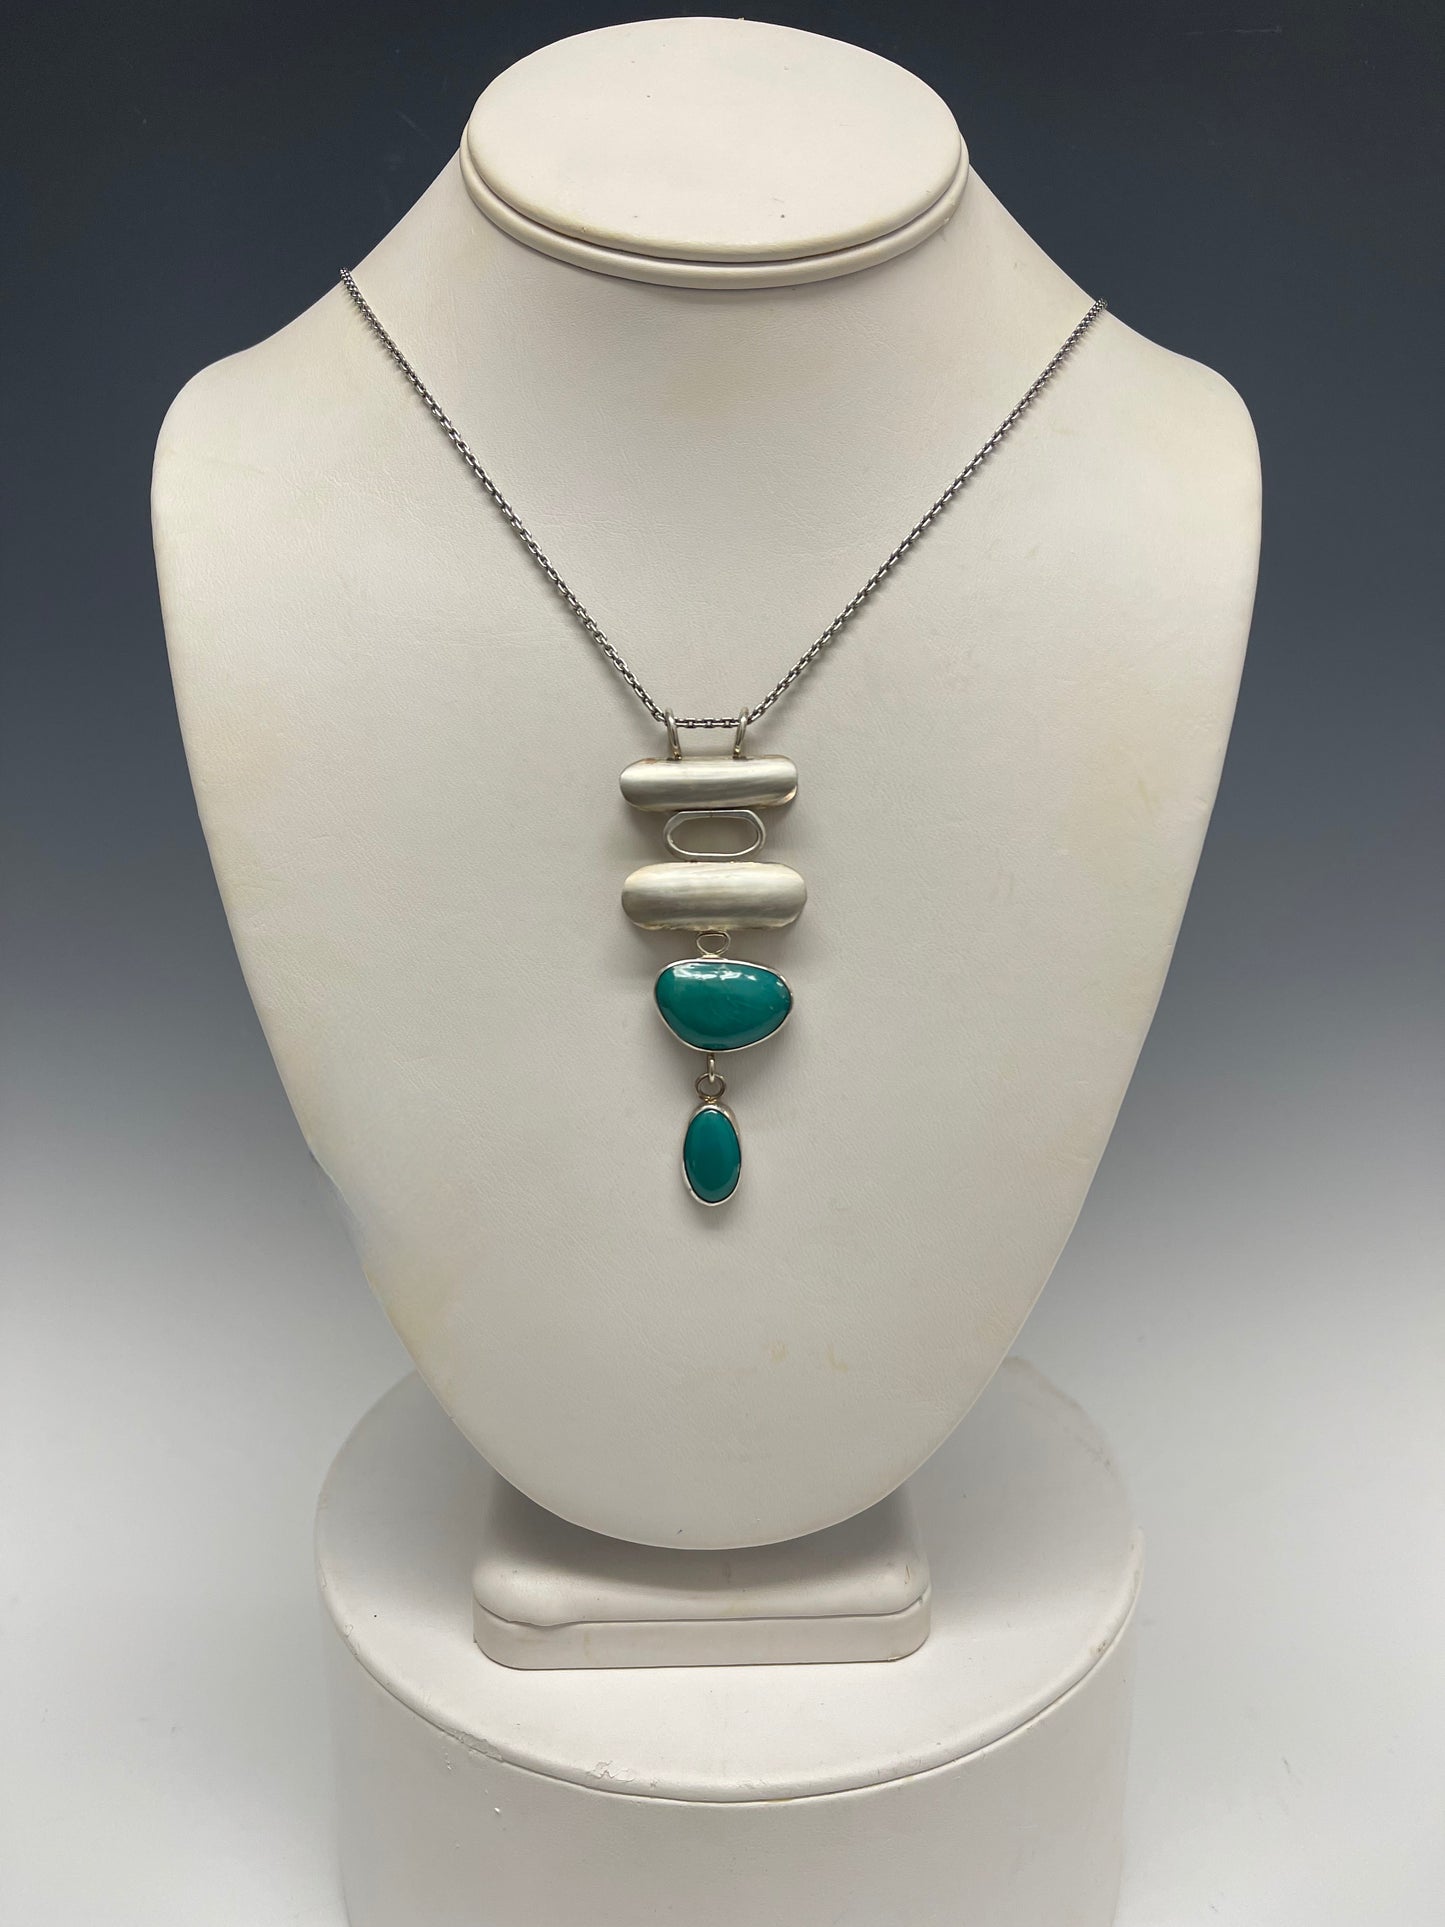 Turquoise and Sterling Silver Pendant with Sterling Silver Chain MB101N